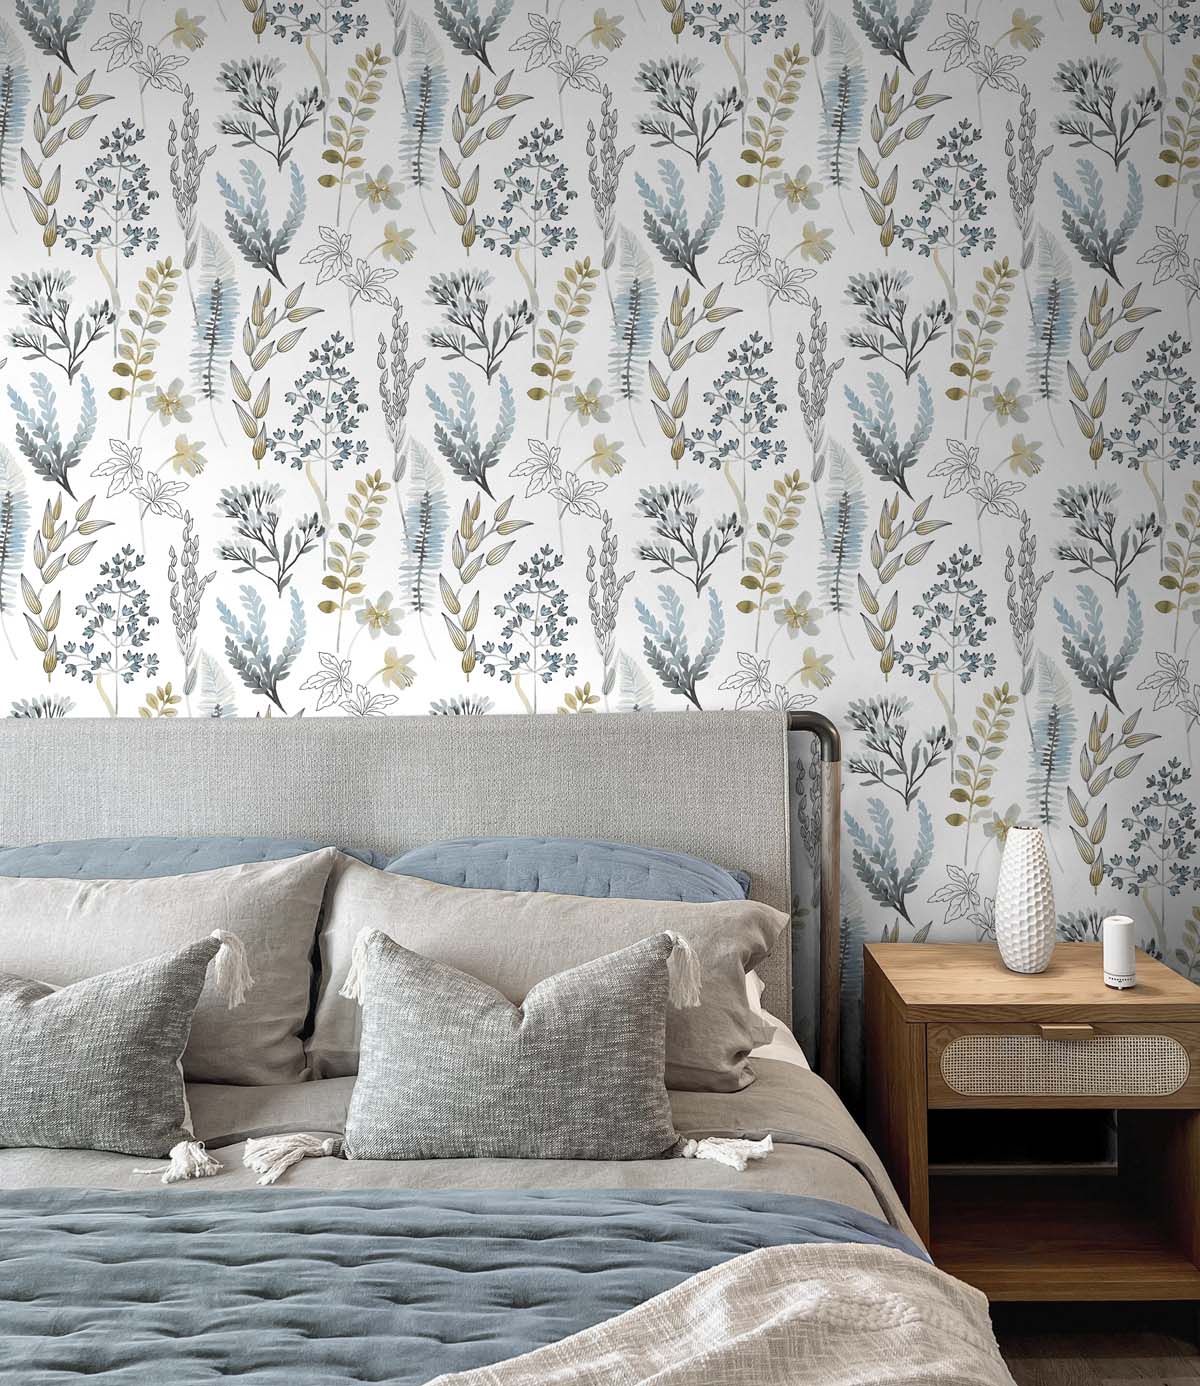 SUSSEXHOME Removable Wallpaper-Waterproof, Strippable, Light Resistance &  Cleanable Wall Paper Roll-Wallpaper-Leaves - On Sale - Bed Bath & Beyond -  31784534